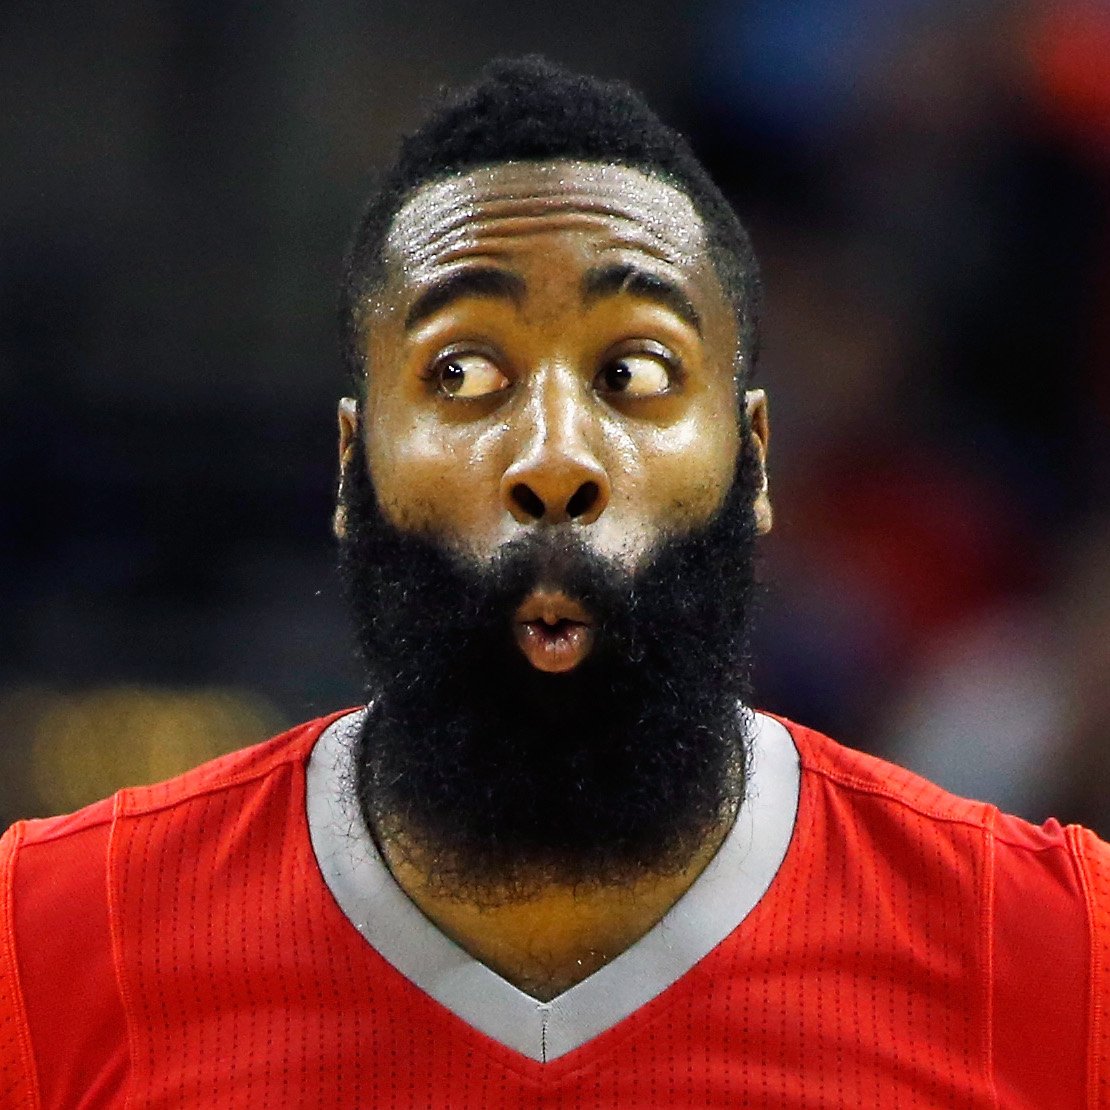 VINTAGE JAMES HARDEN IN FIRST HALF 🔥 20 PTS 4 3PM ‼️ 3 AST 2 BLK Clippers beating Mavs 56-30 😳